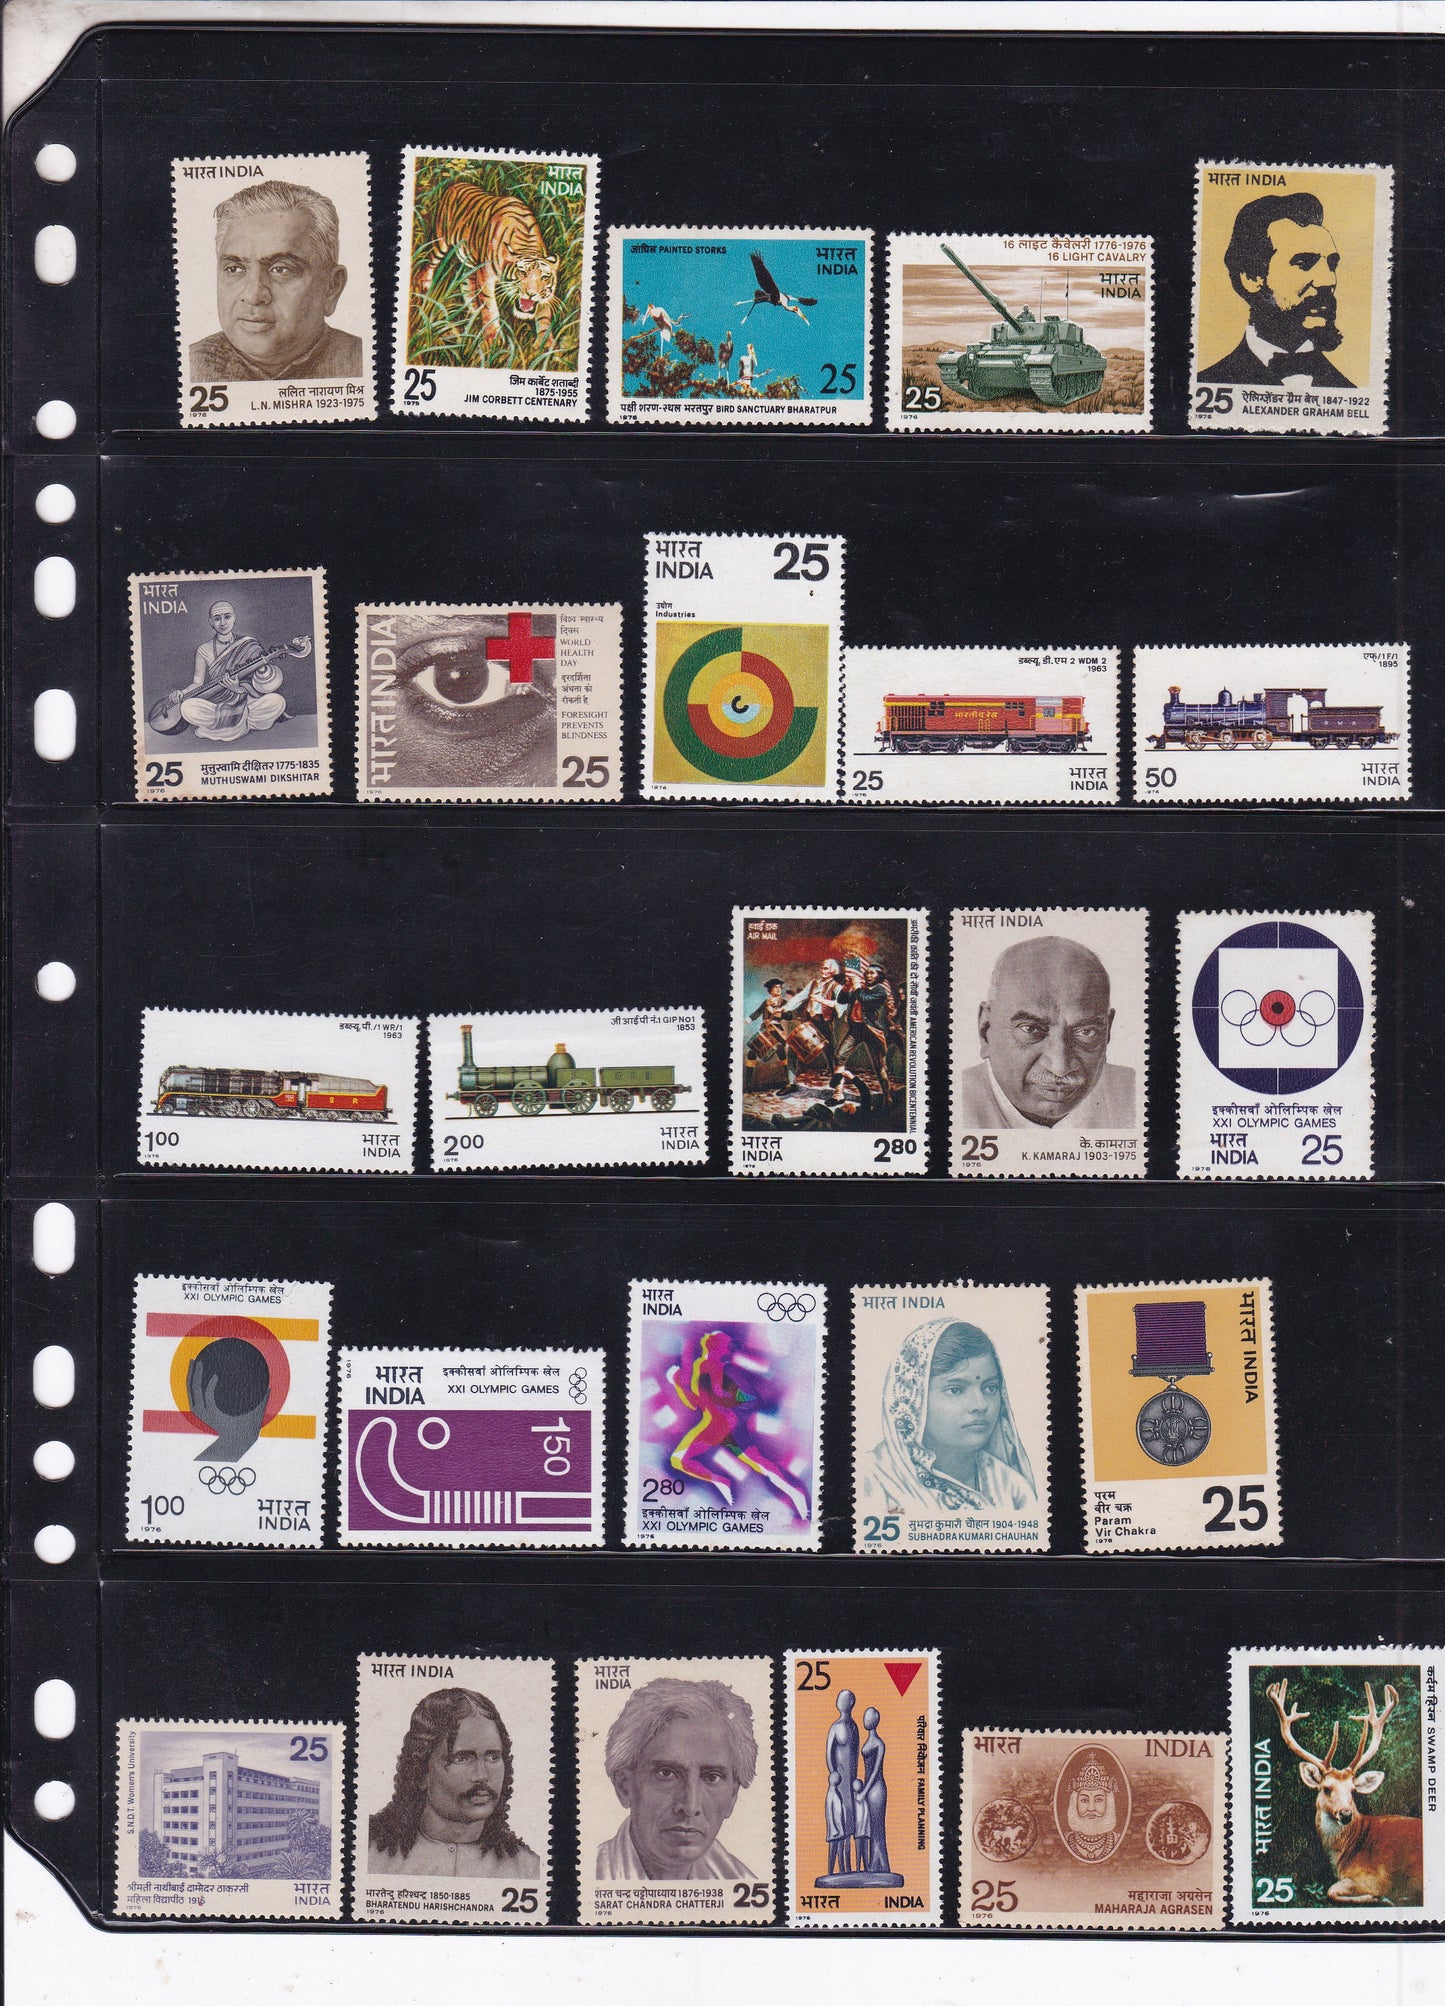 India-1976 Full Year pack MNH Stamps.